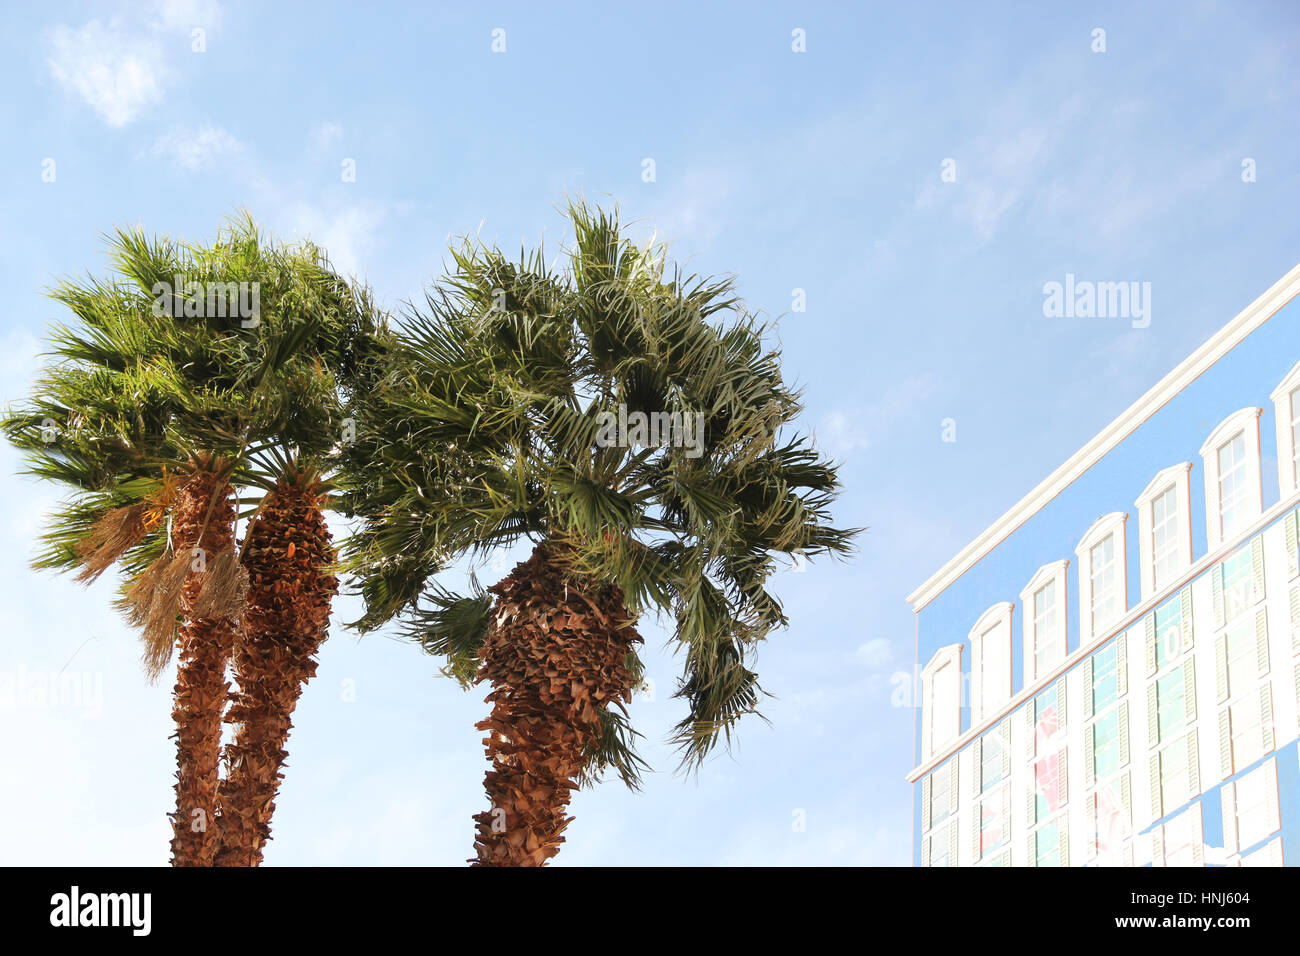 Palmtrees in the city under a blue sky Stock Photo